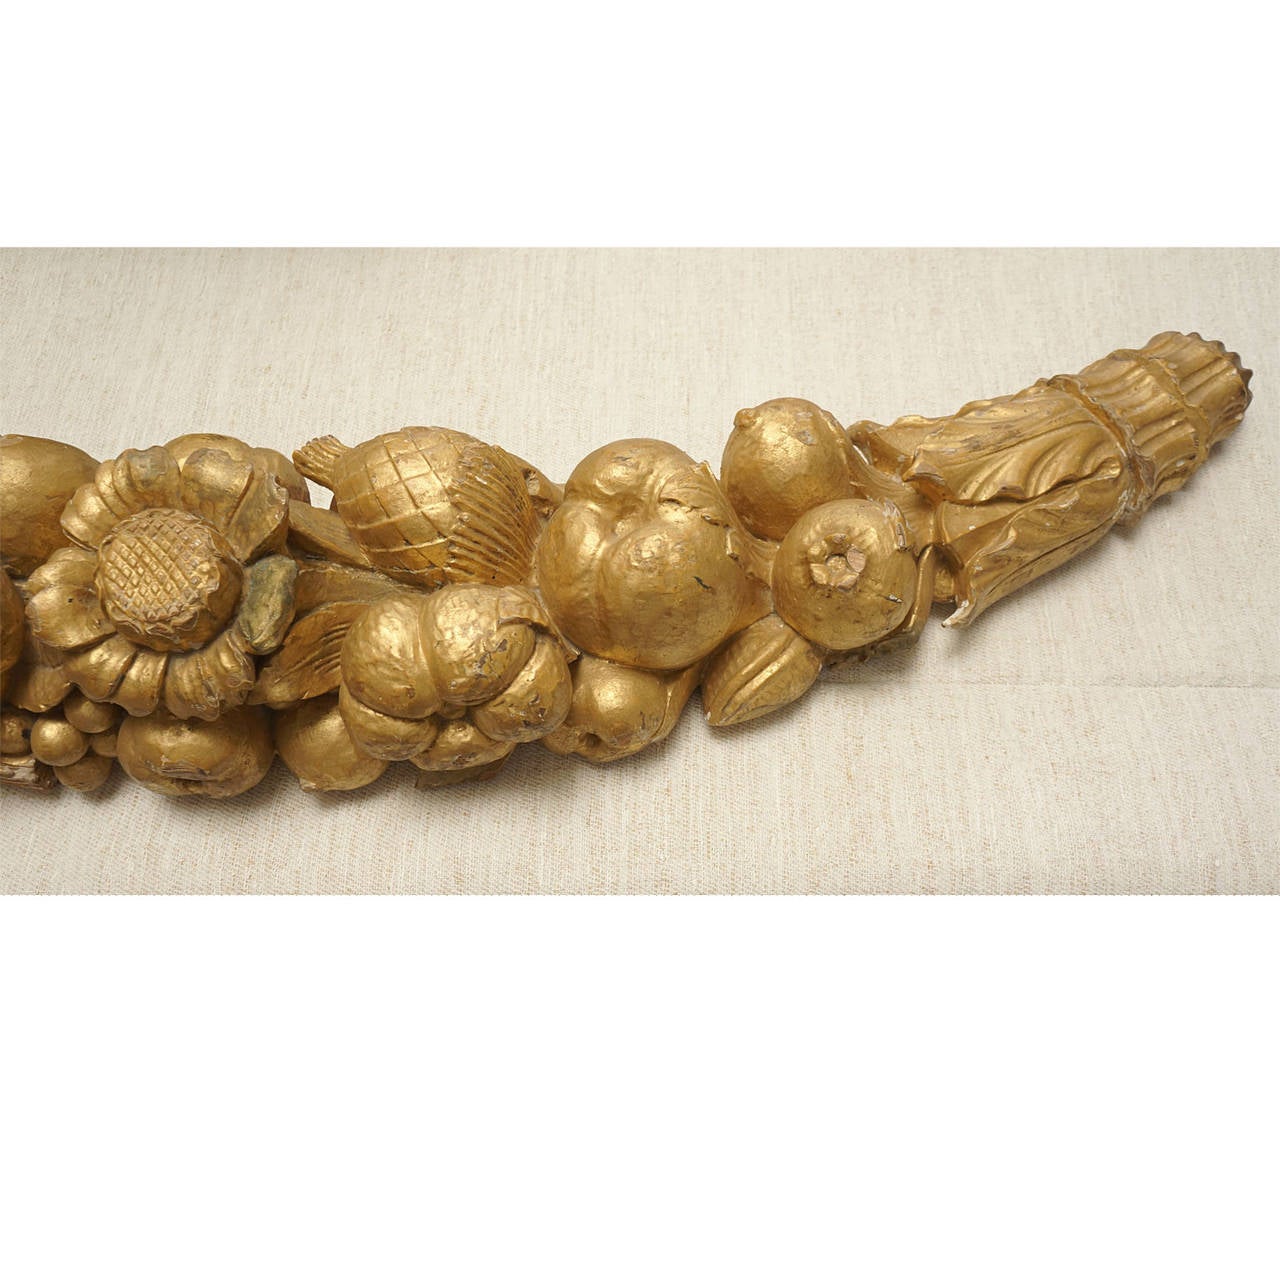 Italian Gilded and Carved Early 19th Century Fruit and Floral Swag For Sale